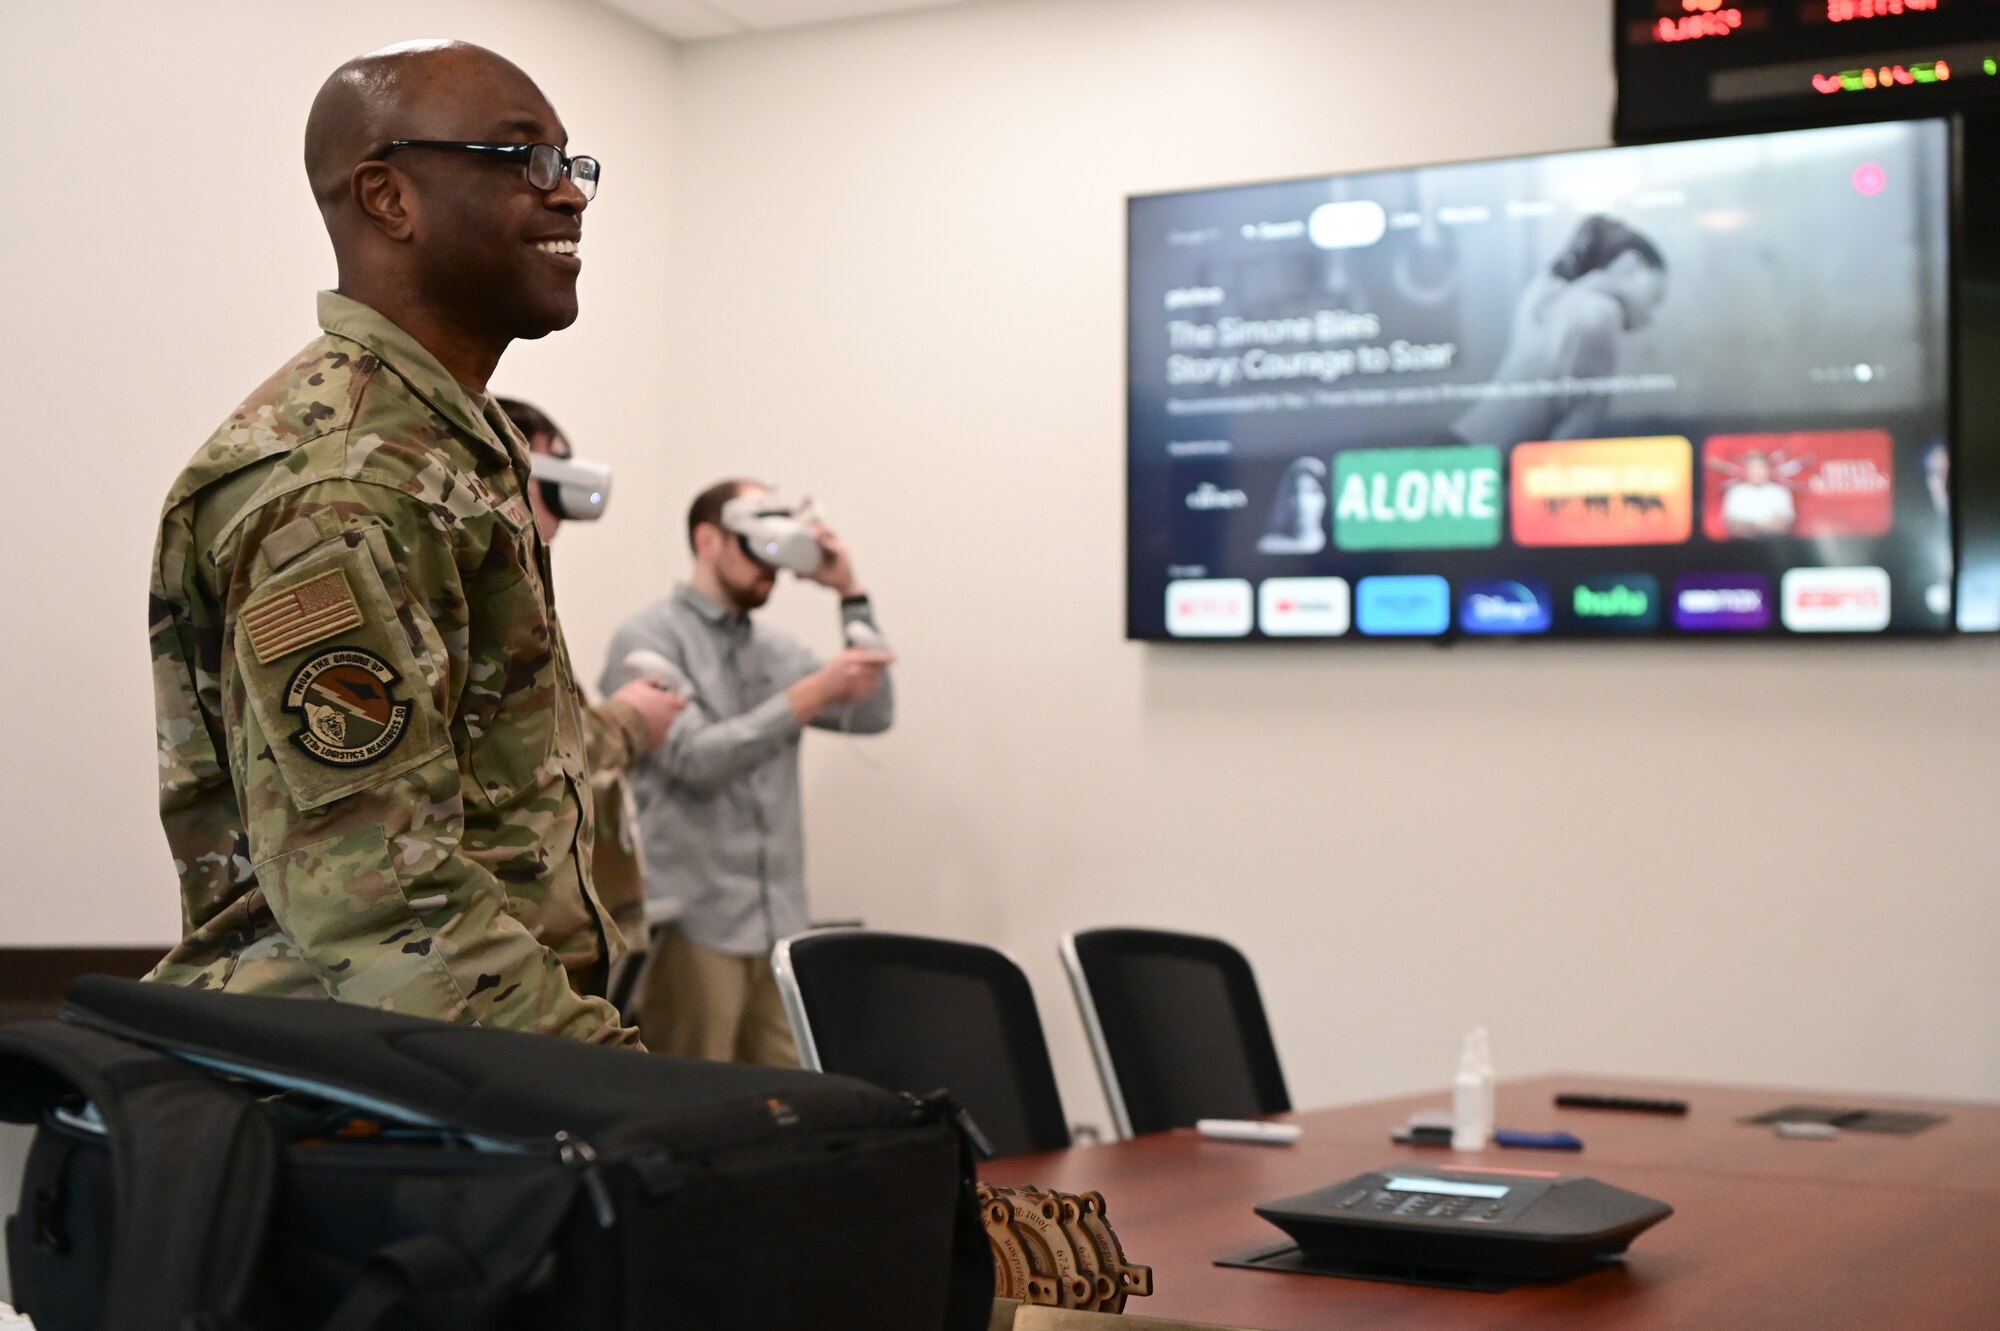 U.S. Air Force Lt. Col. George Okorowdudu, the 673d Logistics Readiness Squadron commander, visits the 673d LRS to talk to the developers of a new Virtual Reality Training tool at Joint Base Elmendorf-Richardson, Alaska, Jan. 31 2023.